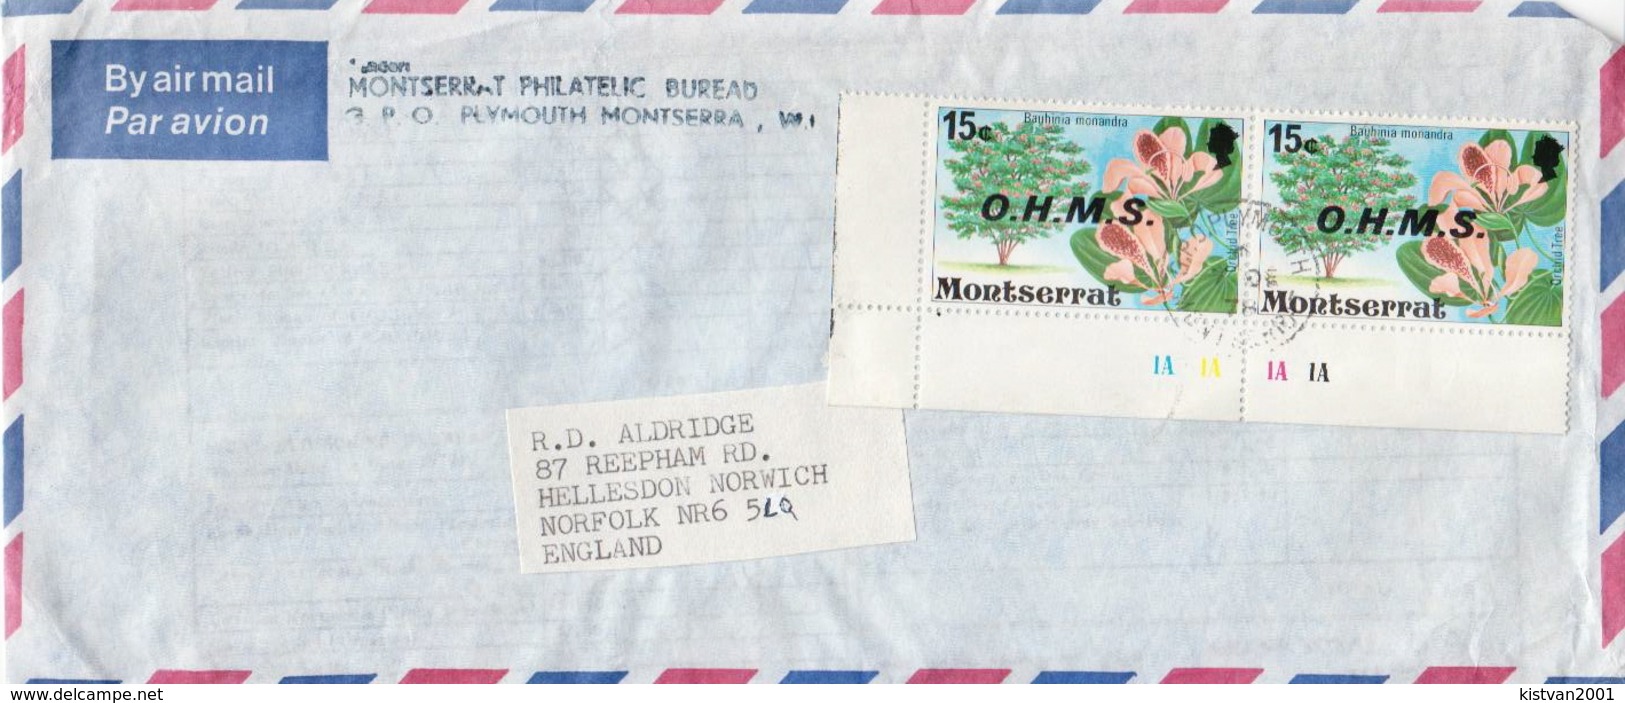 Postal History: Montserrat Cover With OHMS Overprinted Trees Stamps From 1976 - Trees